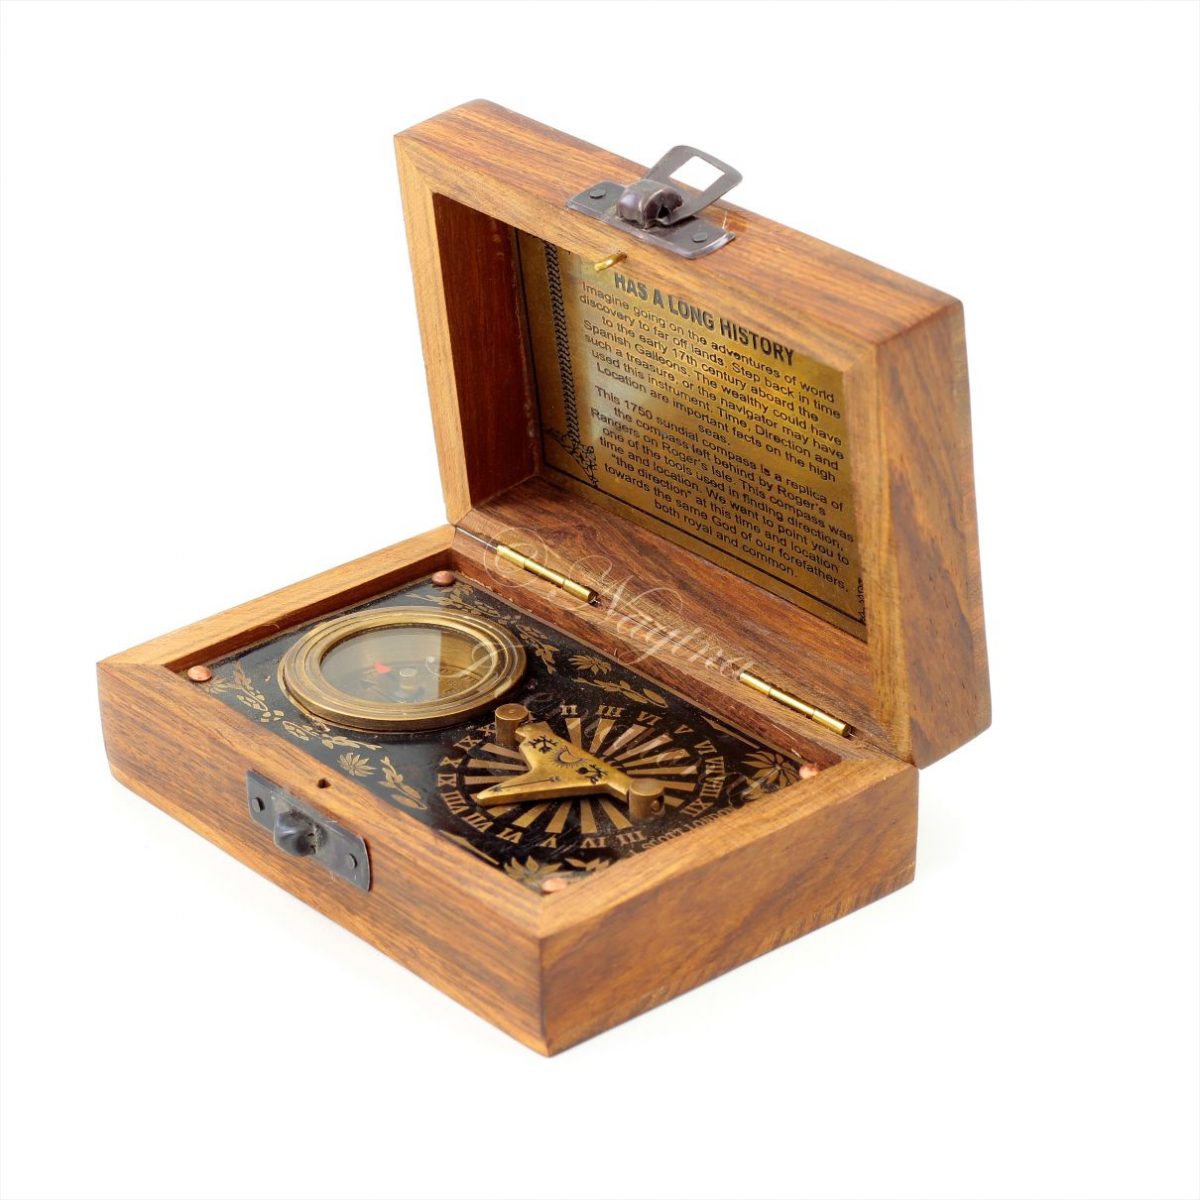 J. Scott Solid Brass Directional & Sun Compasss with Wooden Box | Etched Poem Imagine Going On The Adventure